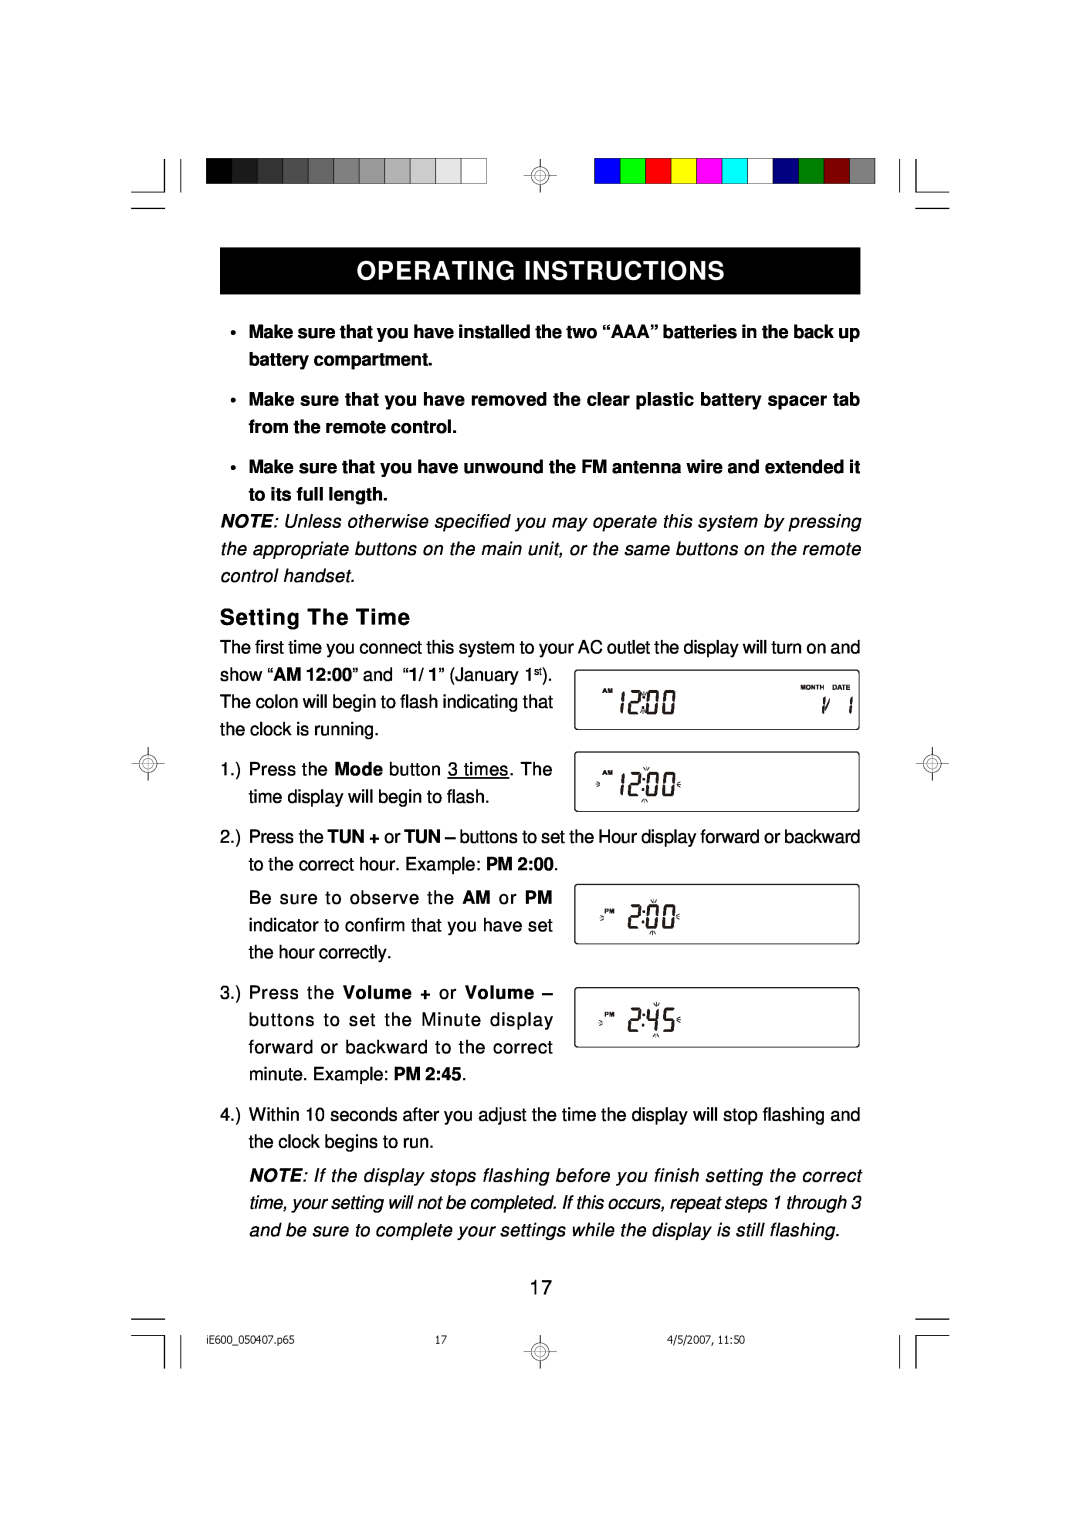 Emerson iE600 owner manual Operating Instructions, Setting The Time 